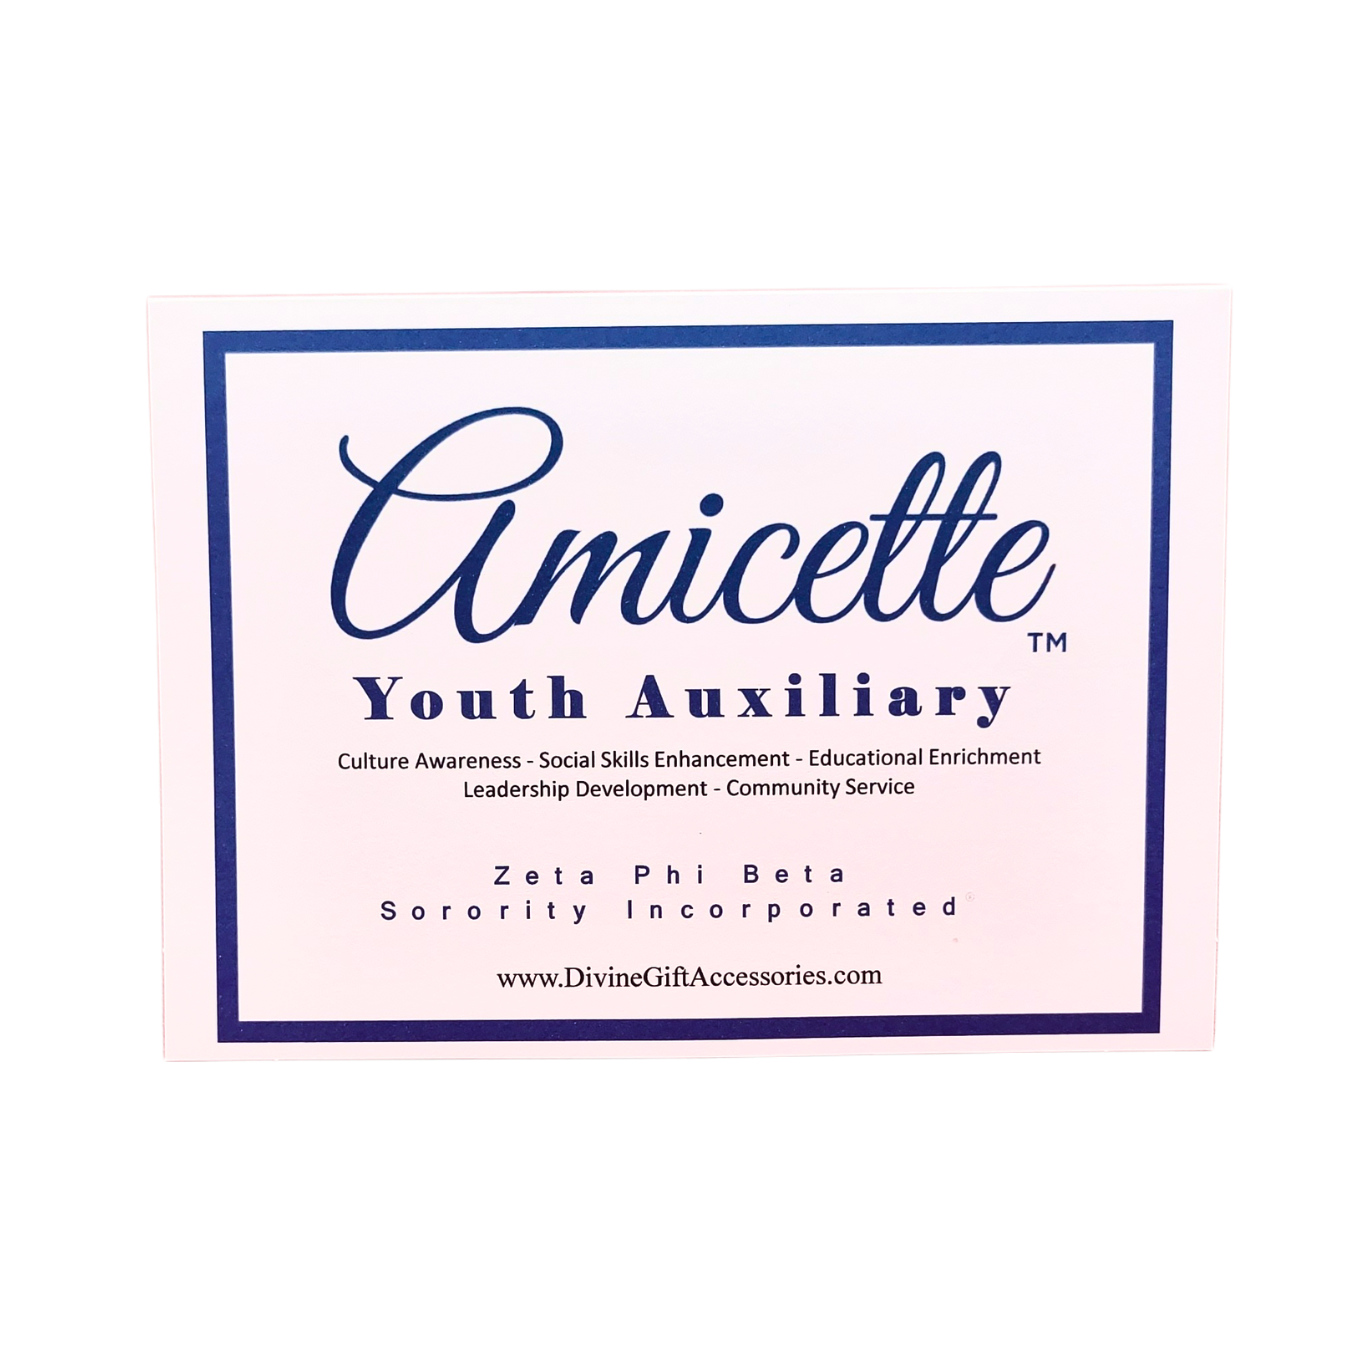 Amicette Note Cards with envelopes (10 count)